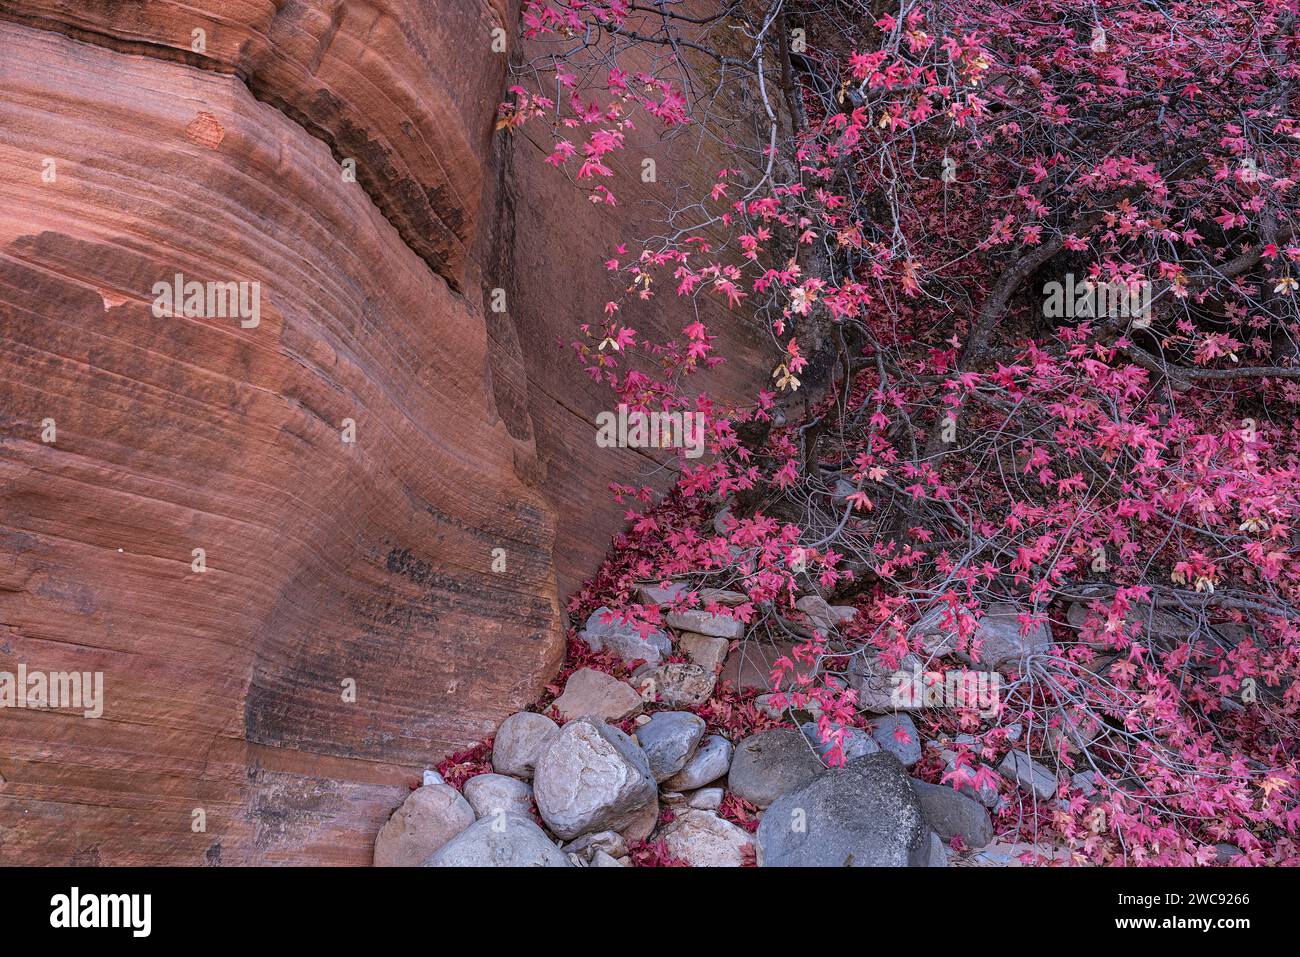 Bigtooth maple in autumn in the Clear Creek section of Zion National Park, Utah Stock Photo